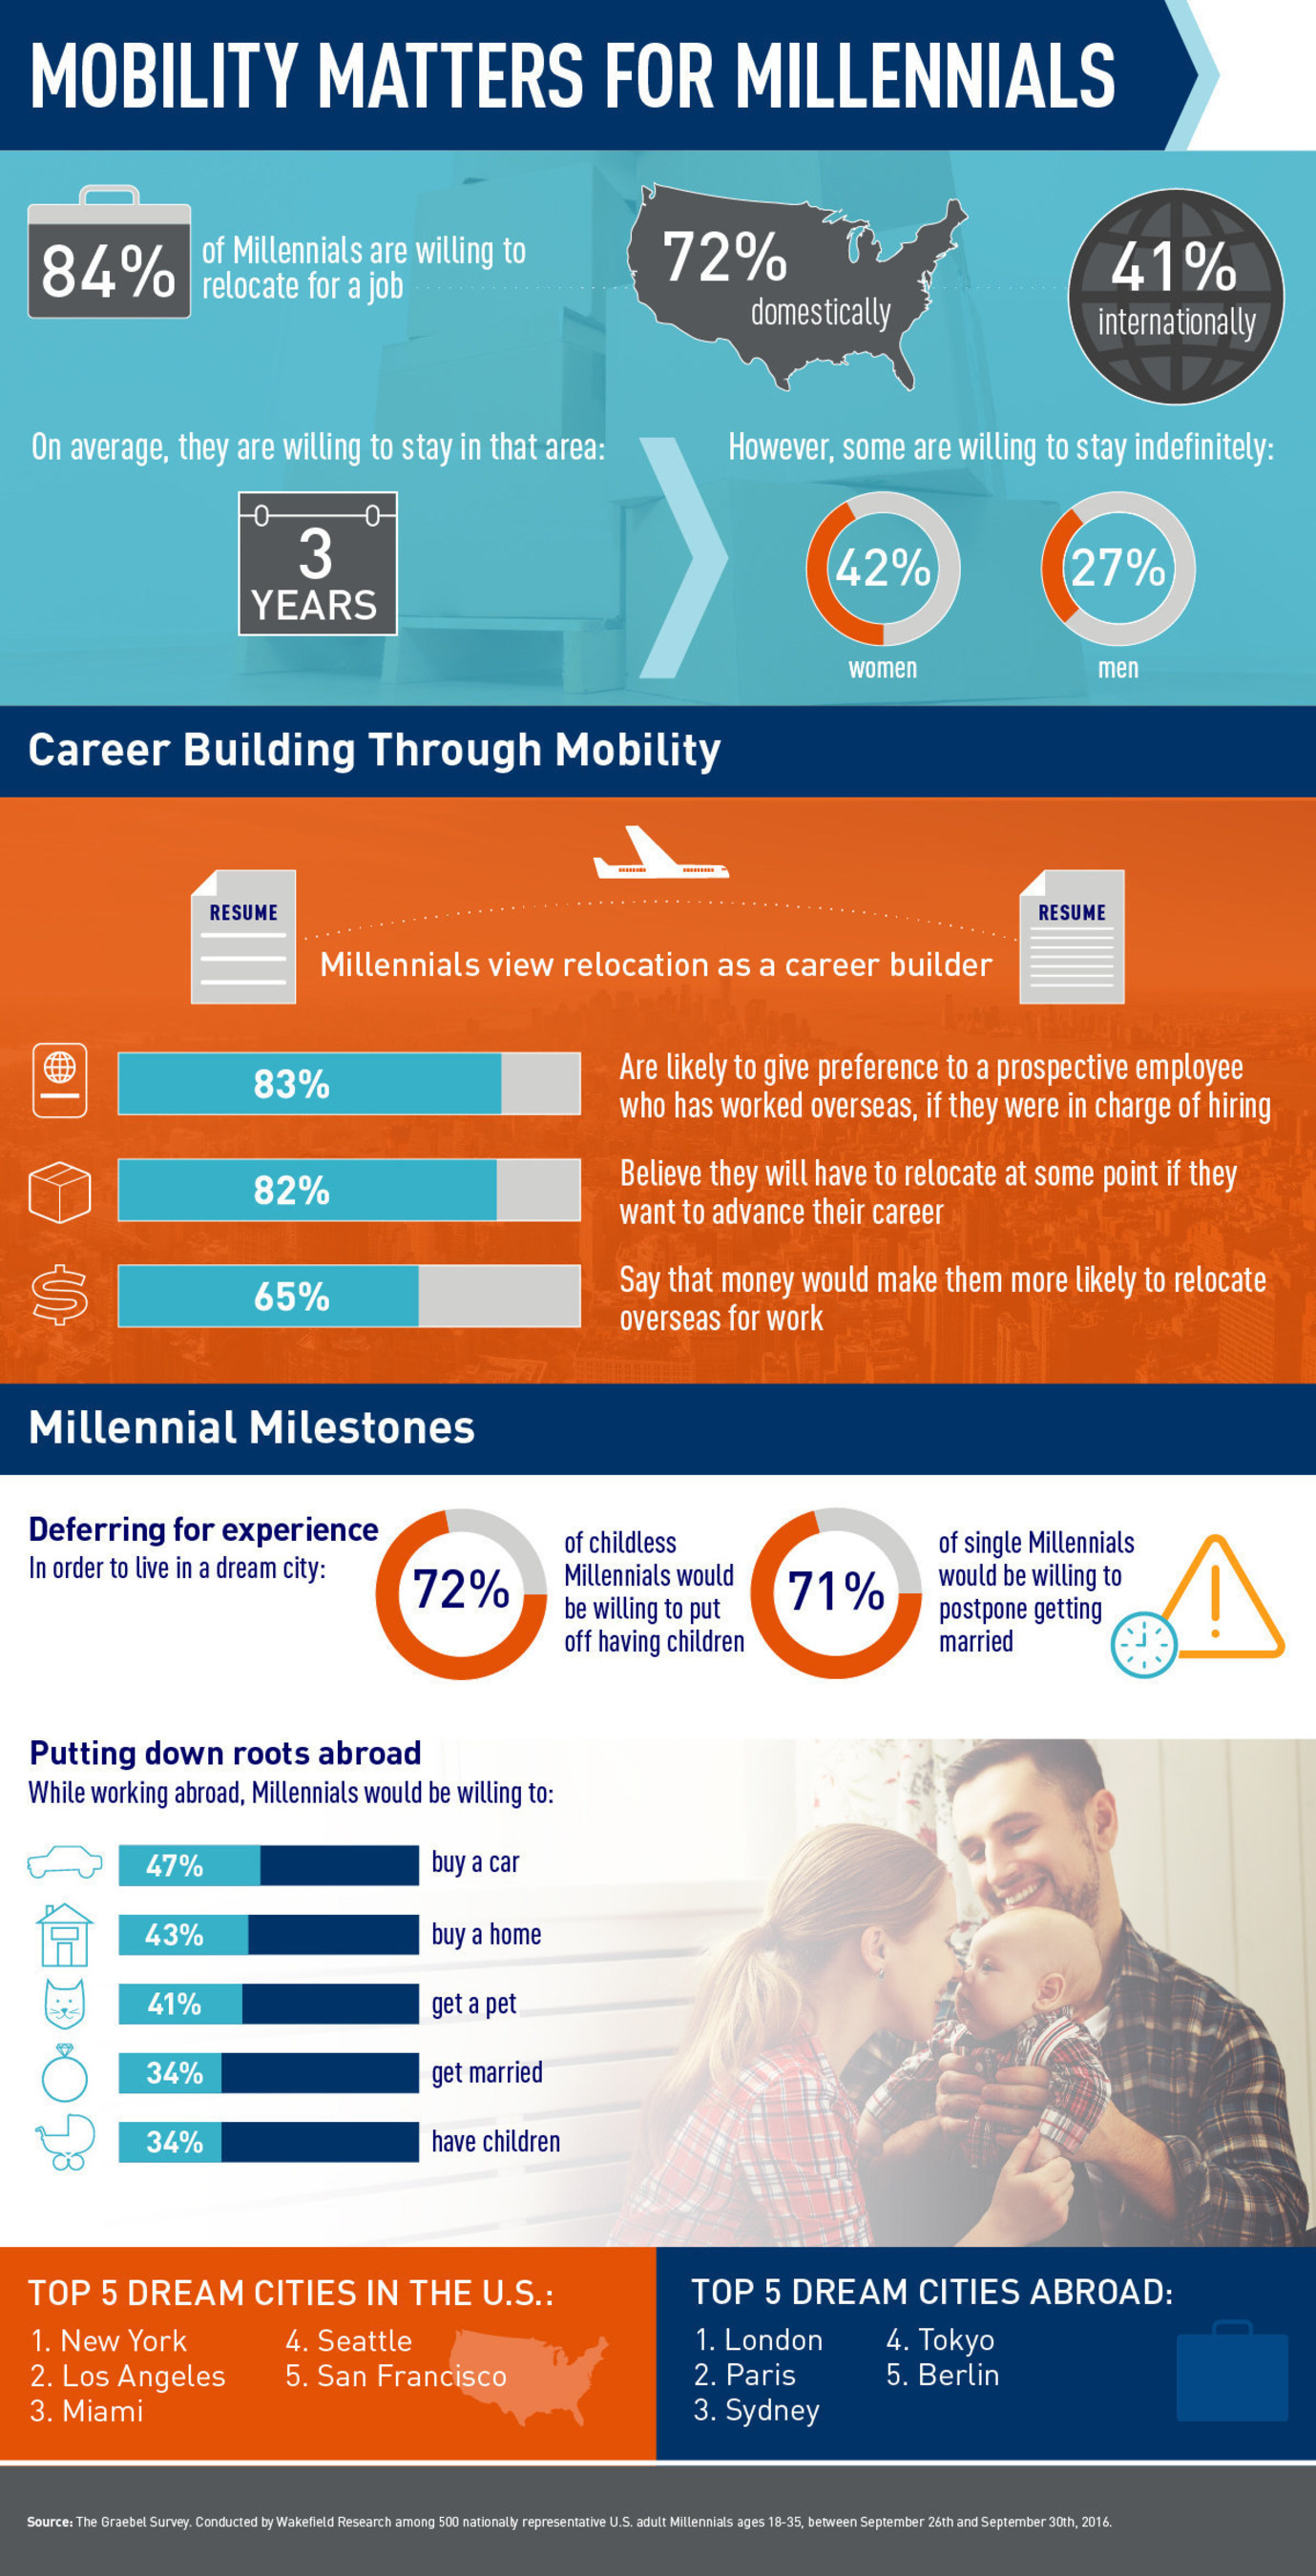 New survey finds Millennials are willing to relocate for a job and see mobility as essential for career advancement.